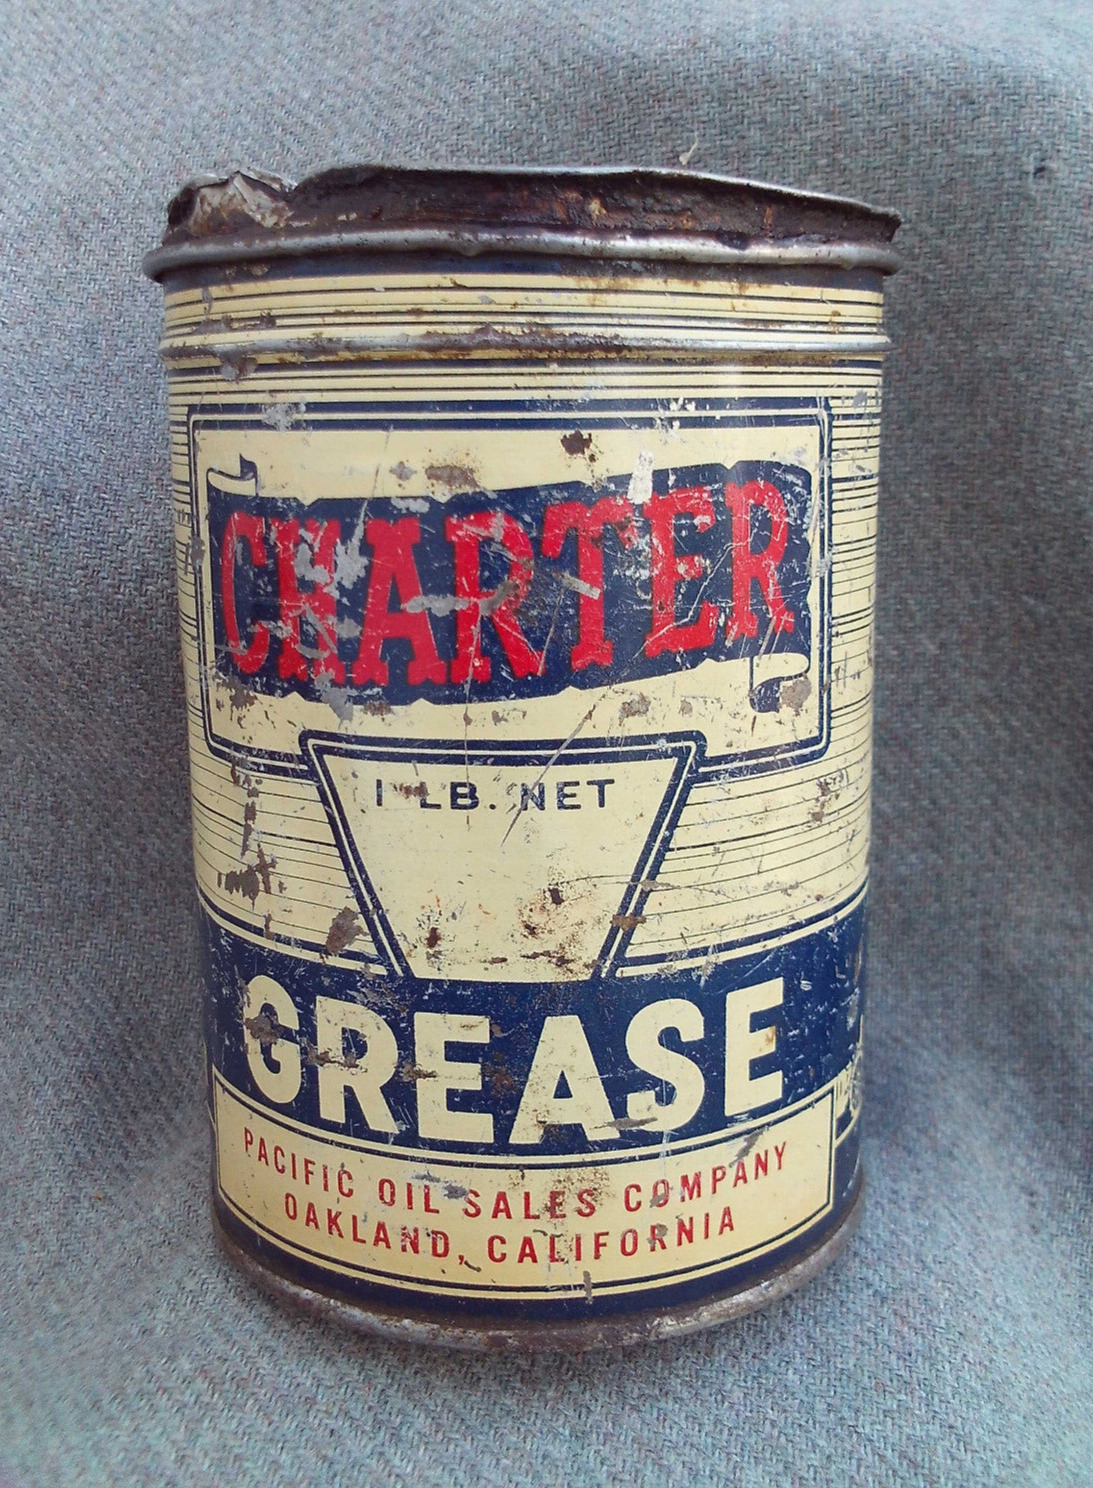 VINTAGE 1940s-50s CHARTER GREASE TIN 1 LB CAN PACIFIC OIL SALES CO. OAKLAND, CA.